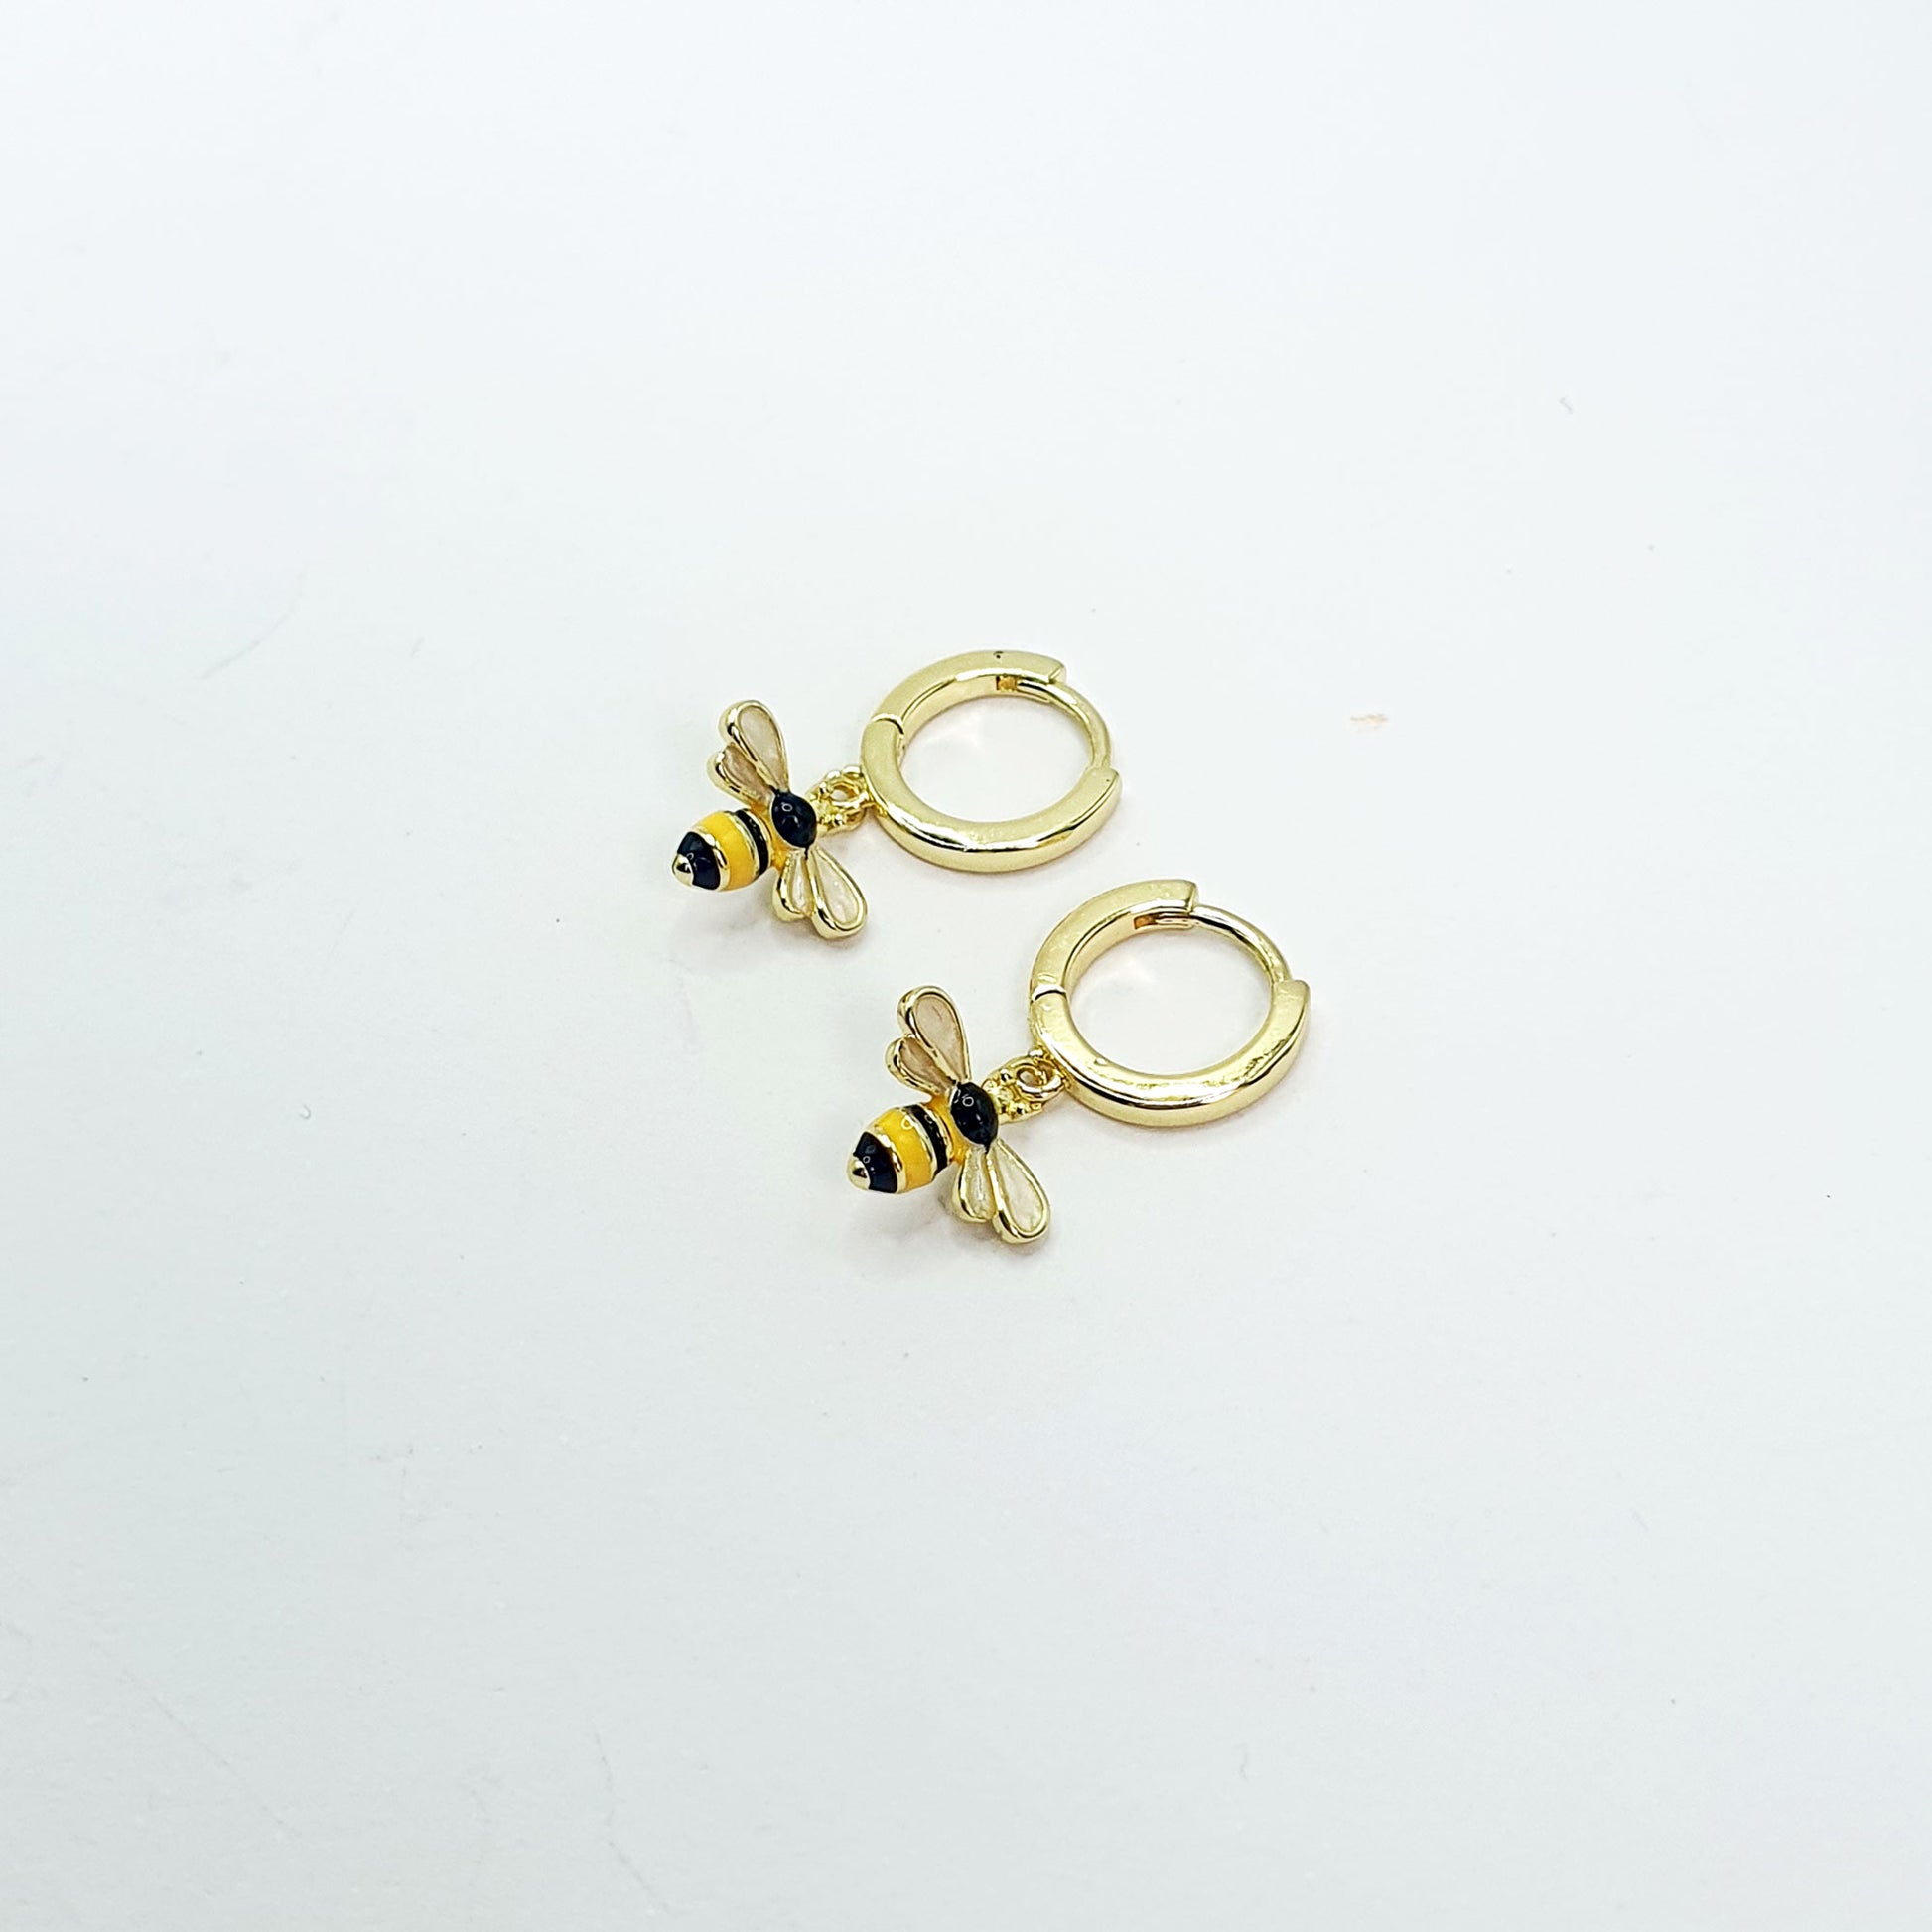 Black & yellow enamelled bees on gold plated hoops